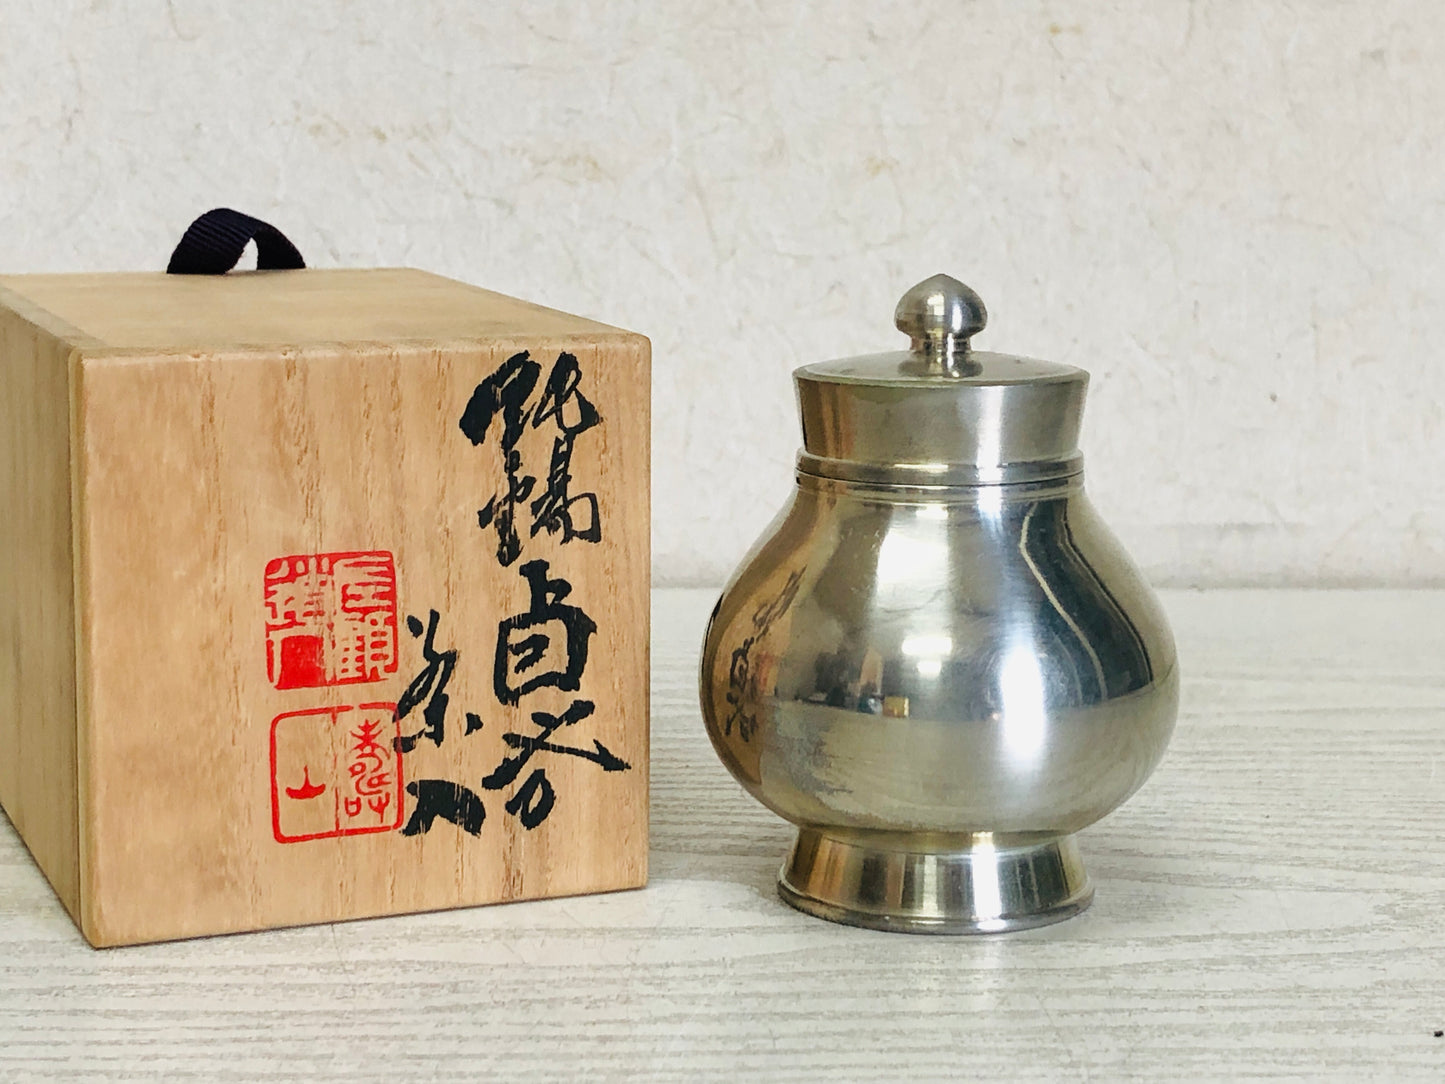 Y3215 TEA CADDY Tin container signed box Japanese Tea Ceremony antique vintage